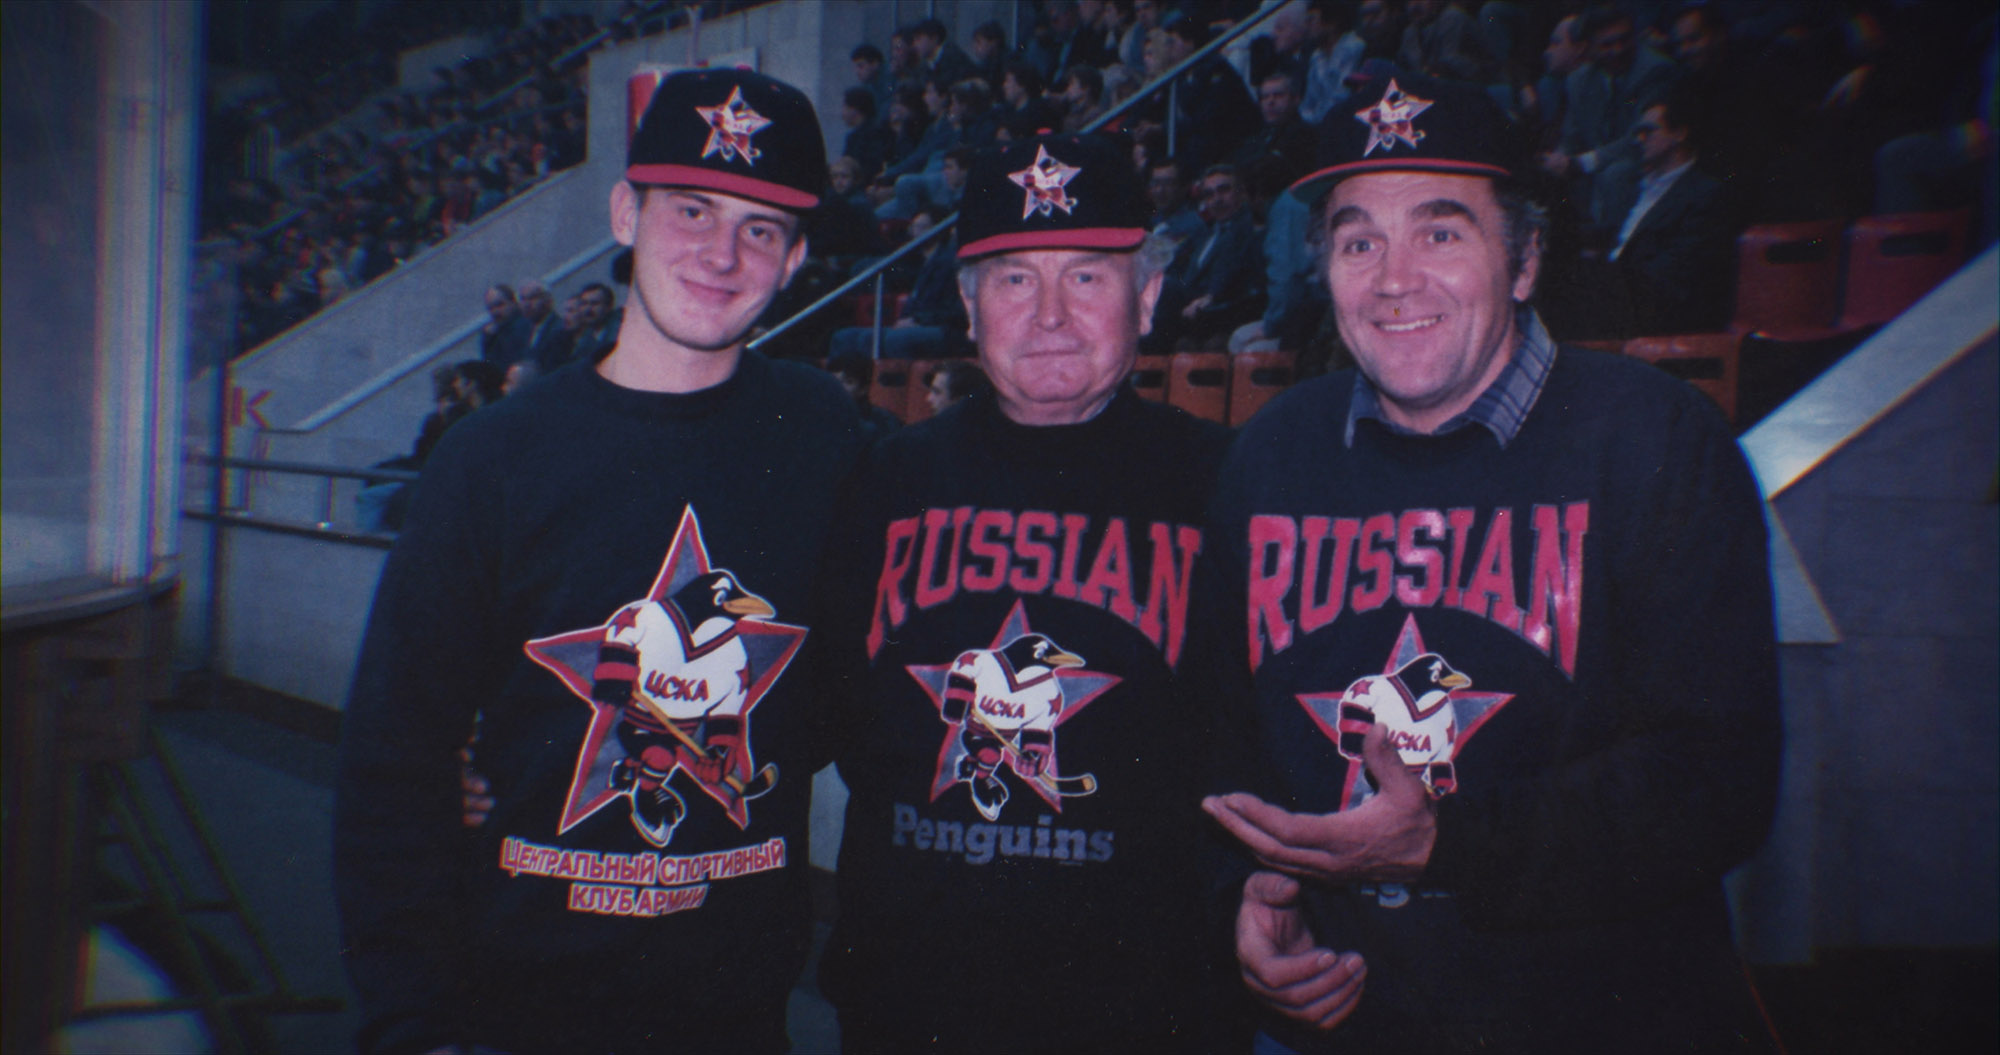 As nebbish capitalist meets 1990s USSR hockey, drunk bears and mob hijinks  ensue